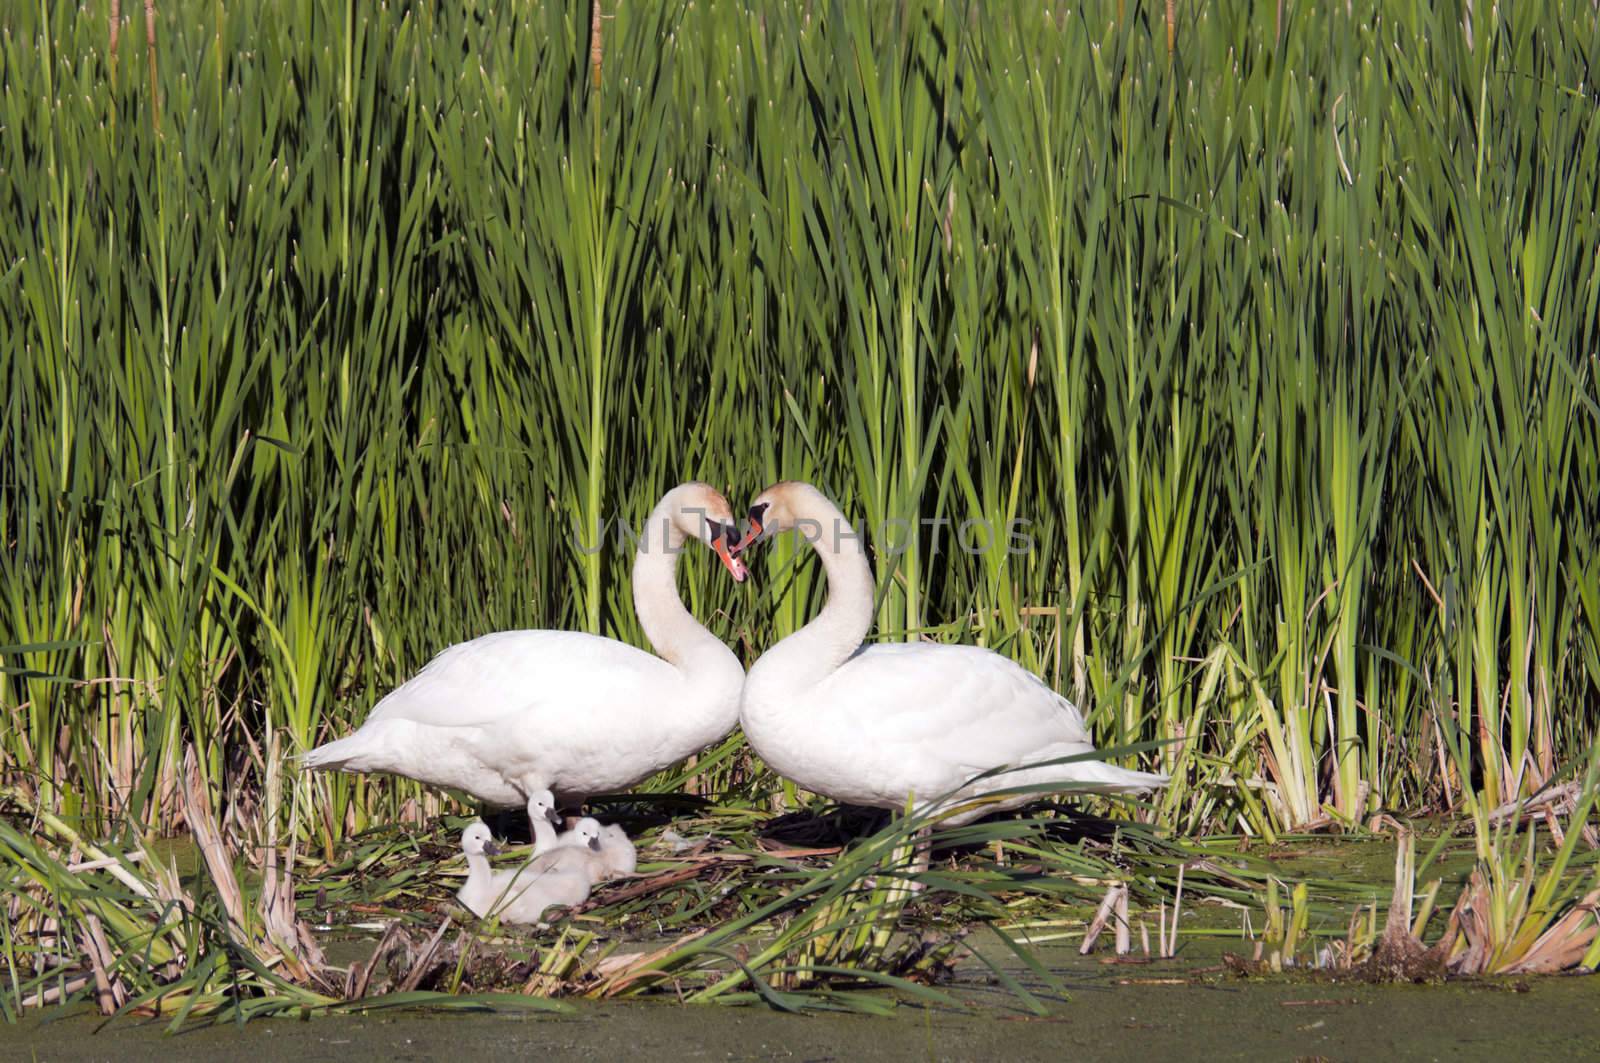 Heart shape swan necks with three young swans look on, with copy space in the marsh reeds